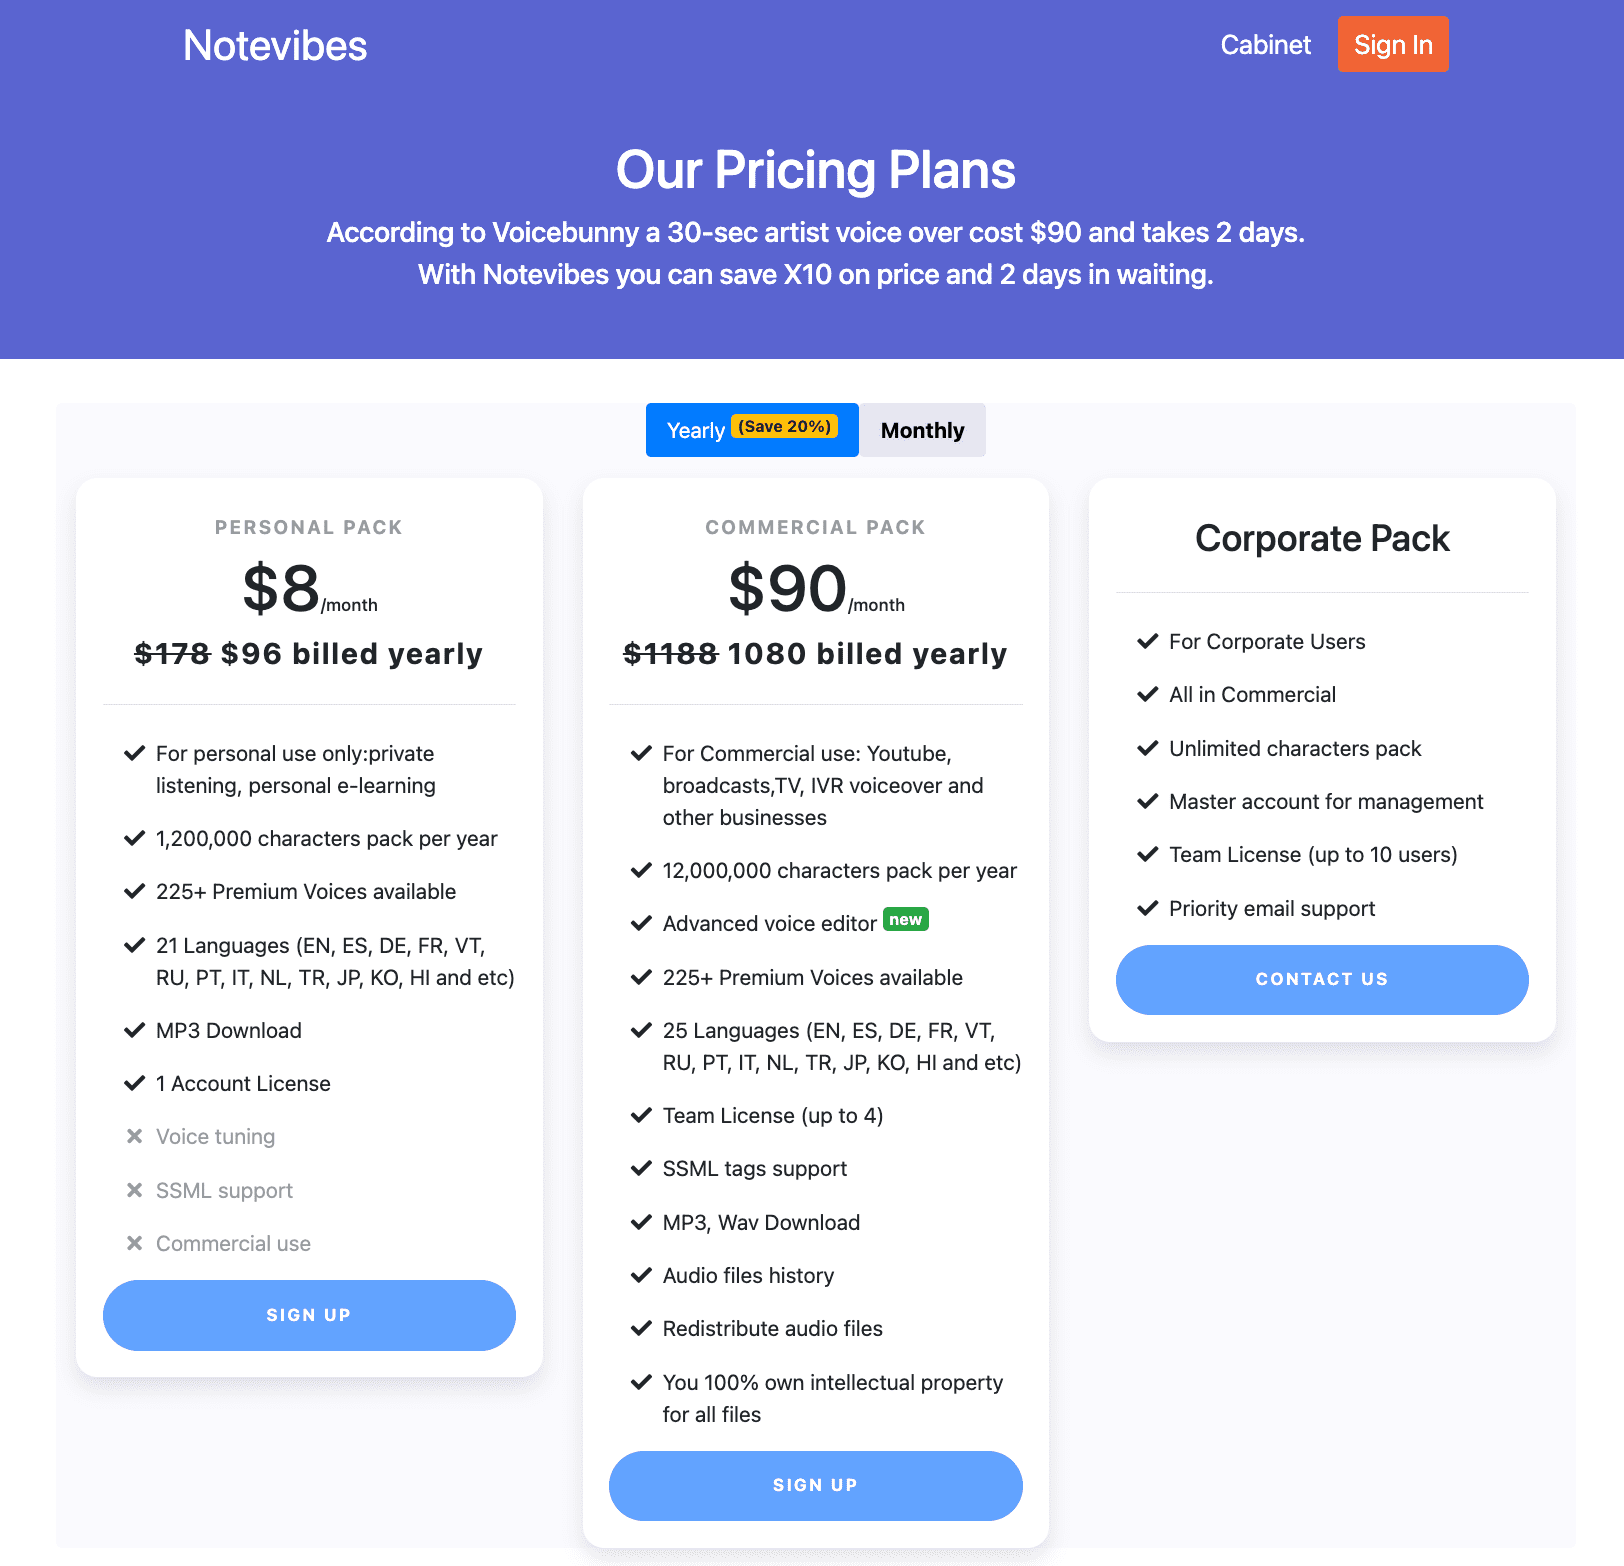 Notevibes pricing options